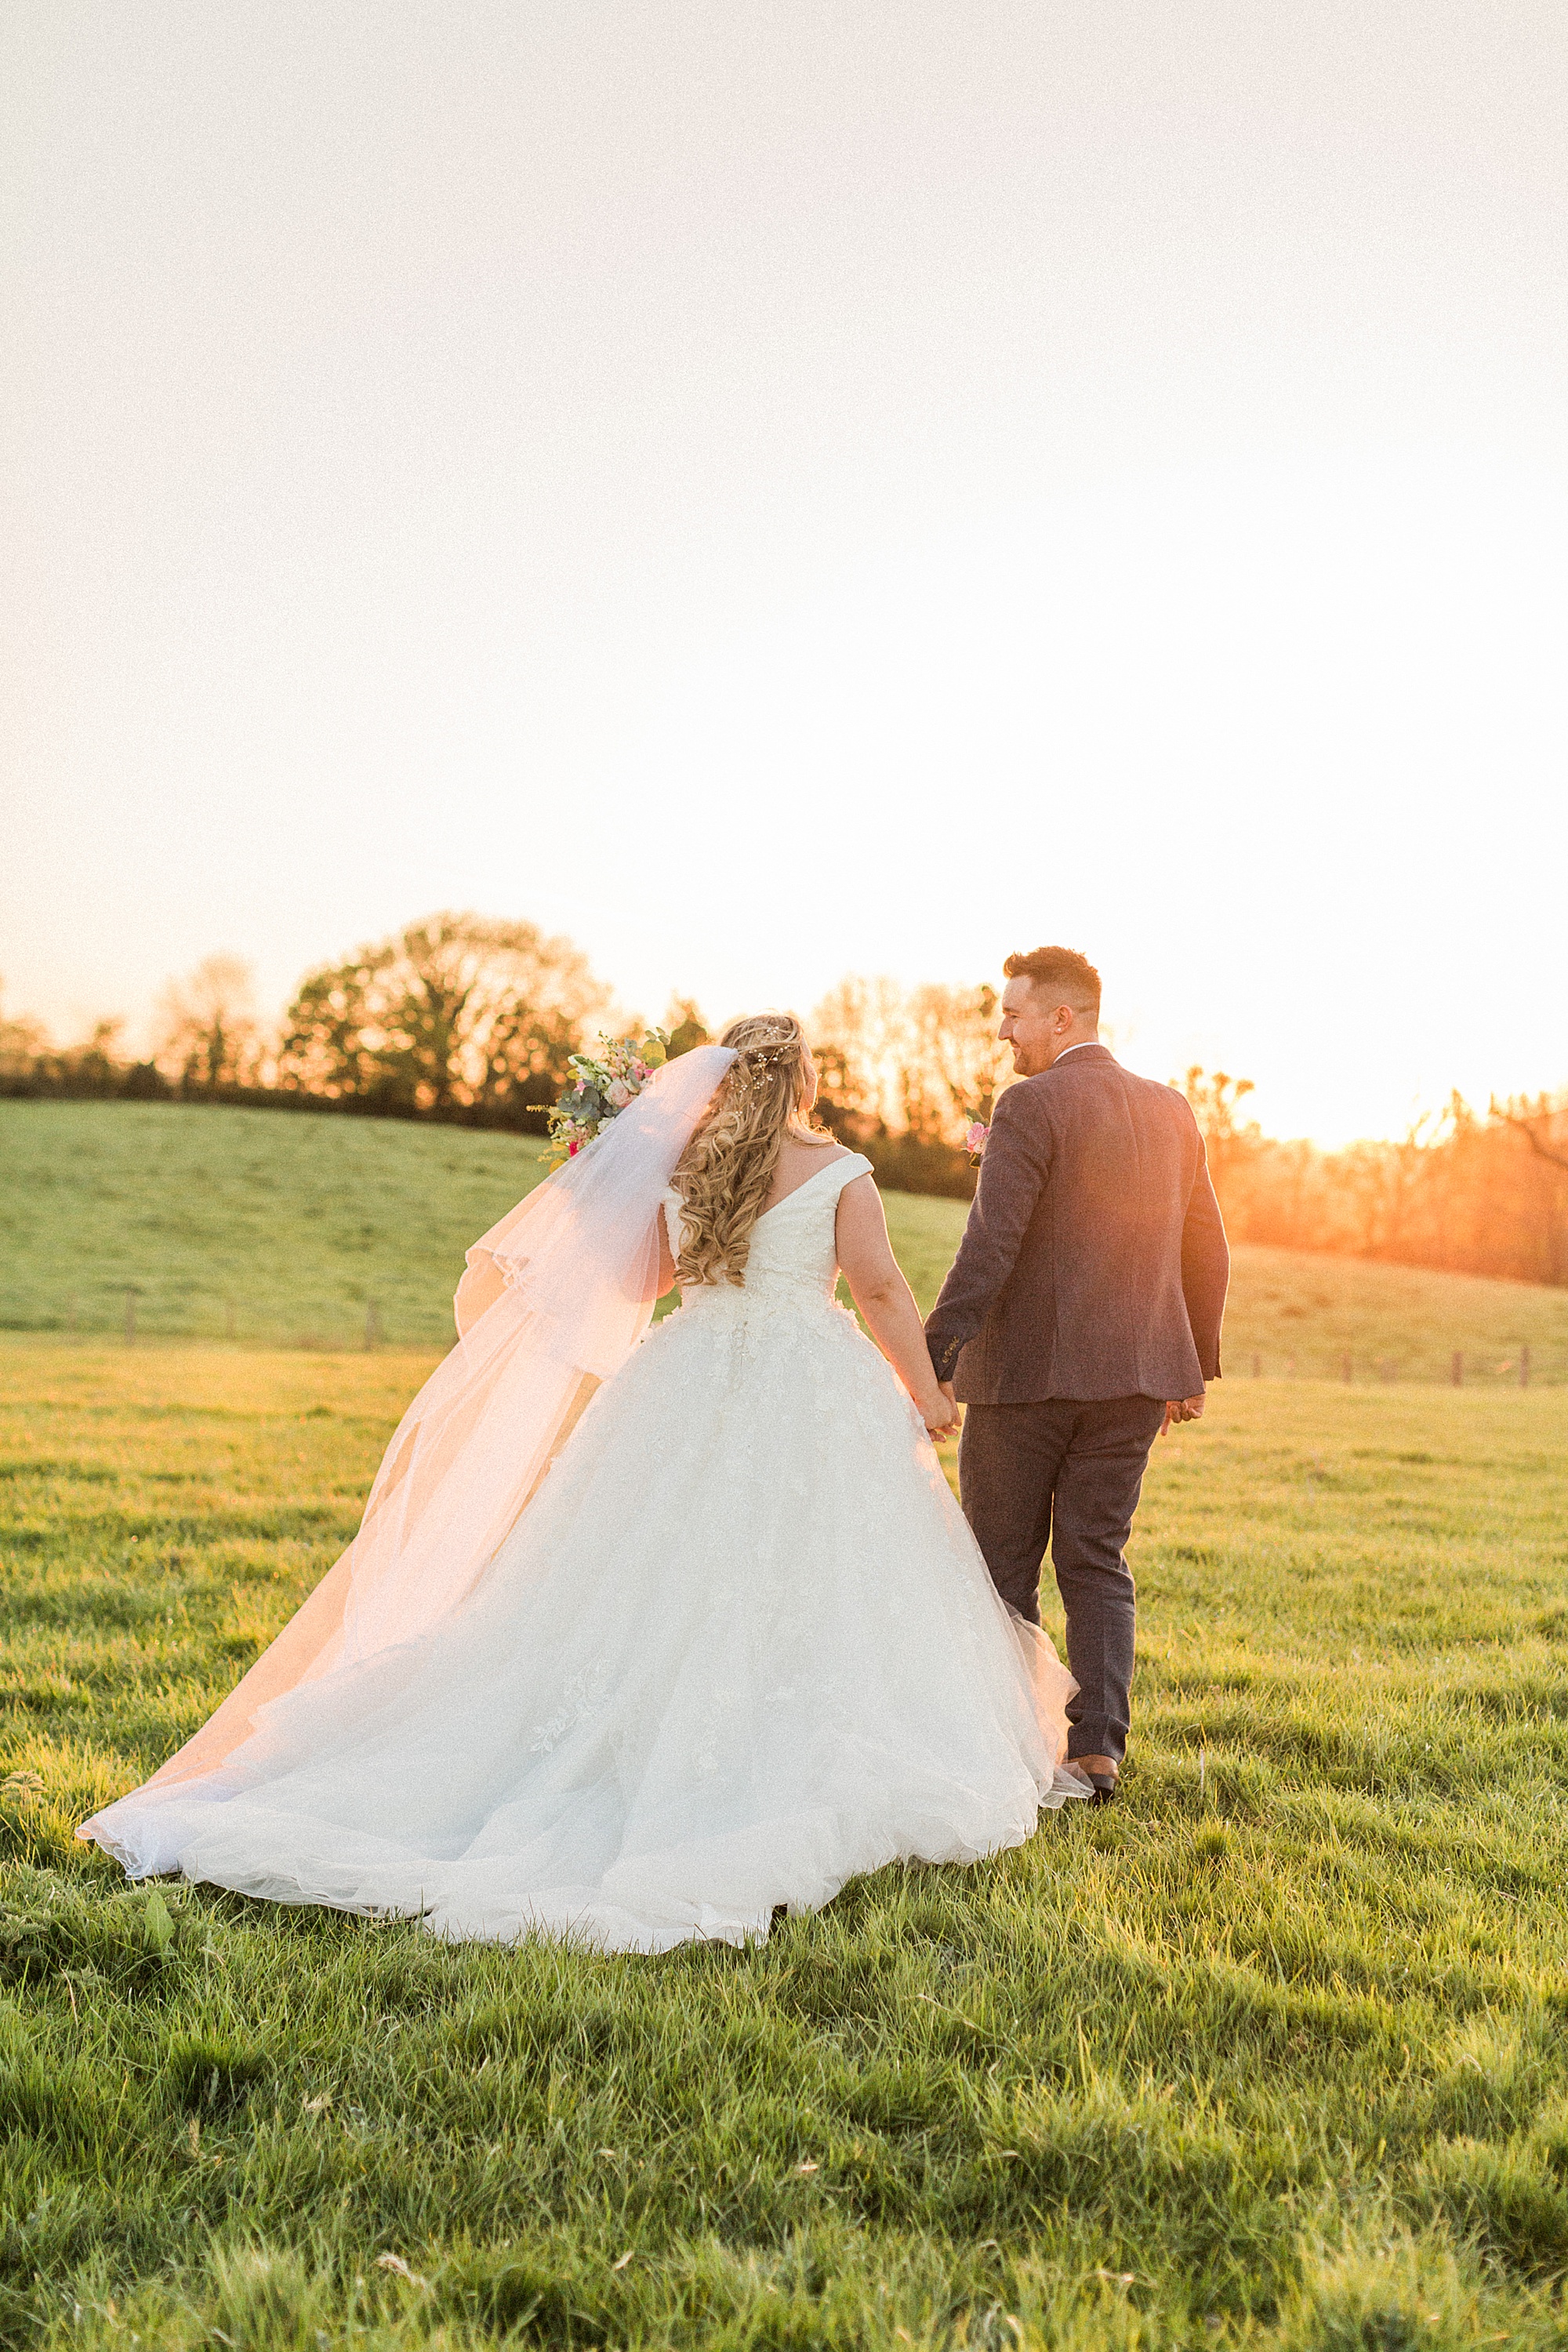 Image shows a bride and groom on their wedding day walking together holding hands in a field during sunset, looking and smiling towards each other. They're walking away from the camera